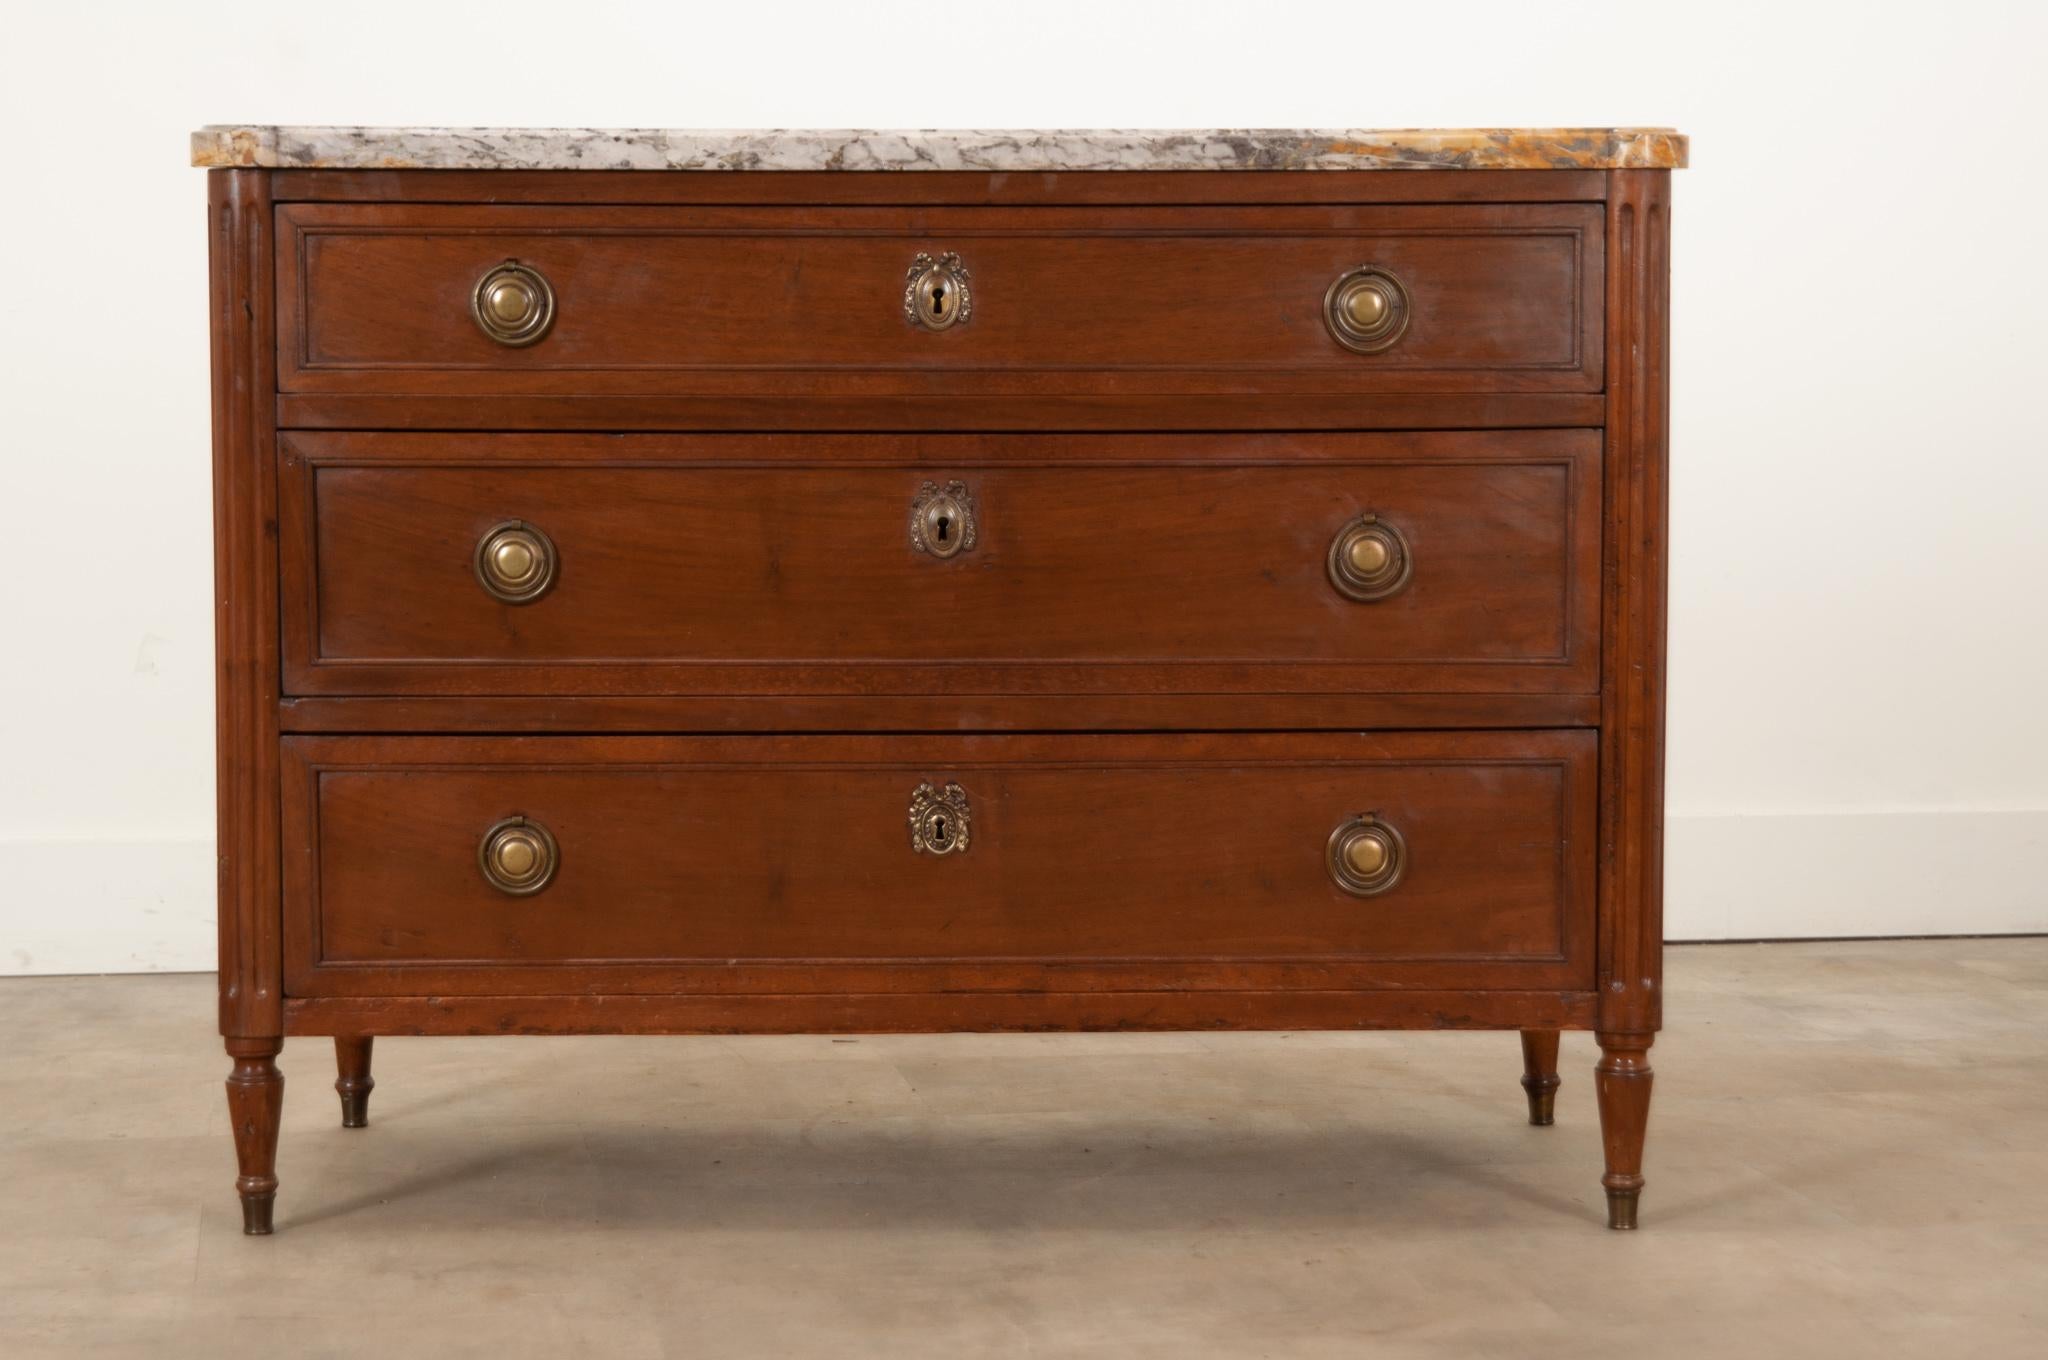 A French 19th Century Louis XVI style commode made of beautiful mahogany and topped with its original show-stopping piece of marble. Hand-crafted in France circa 1830, its shaped marble top contains the most beautiful colors of ochre, charcoal, and